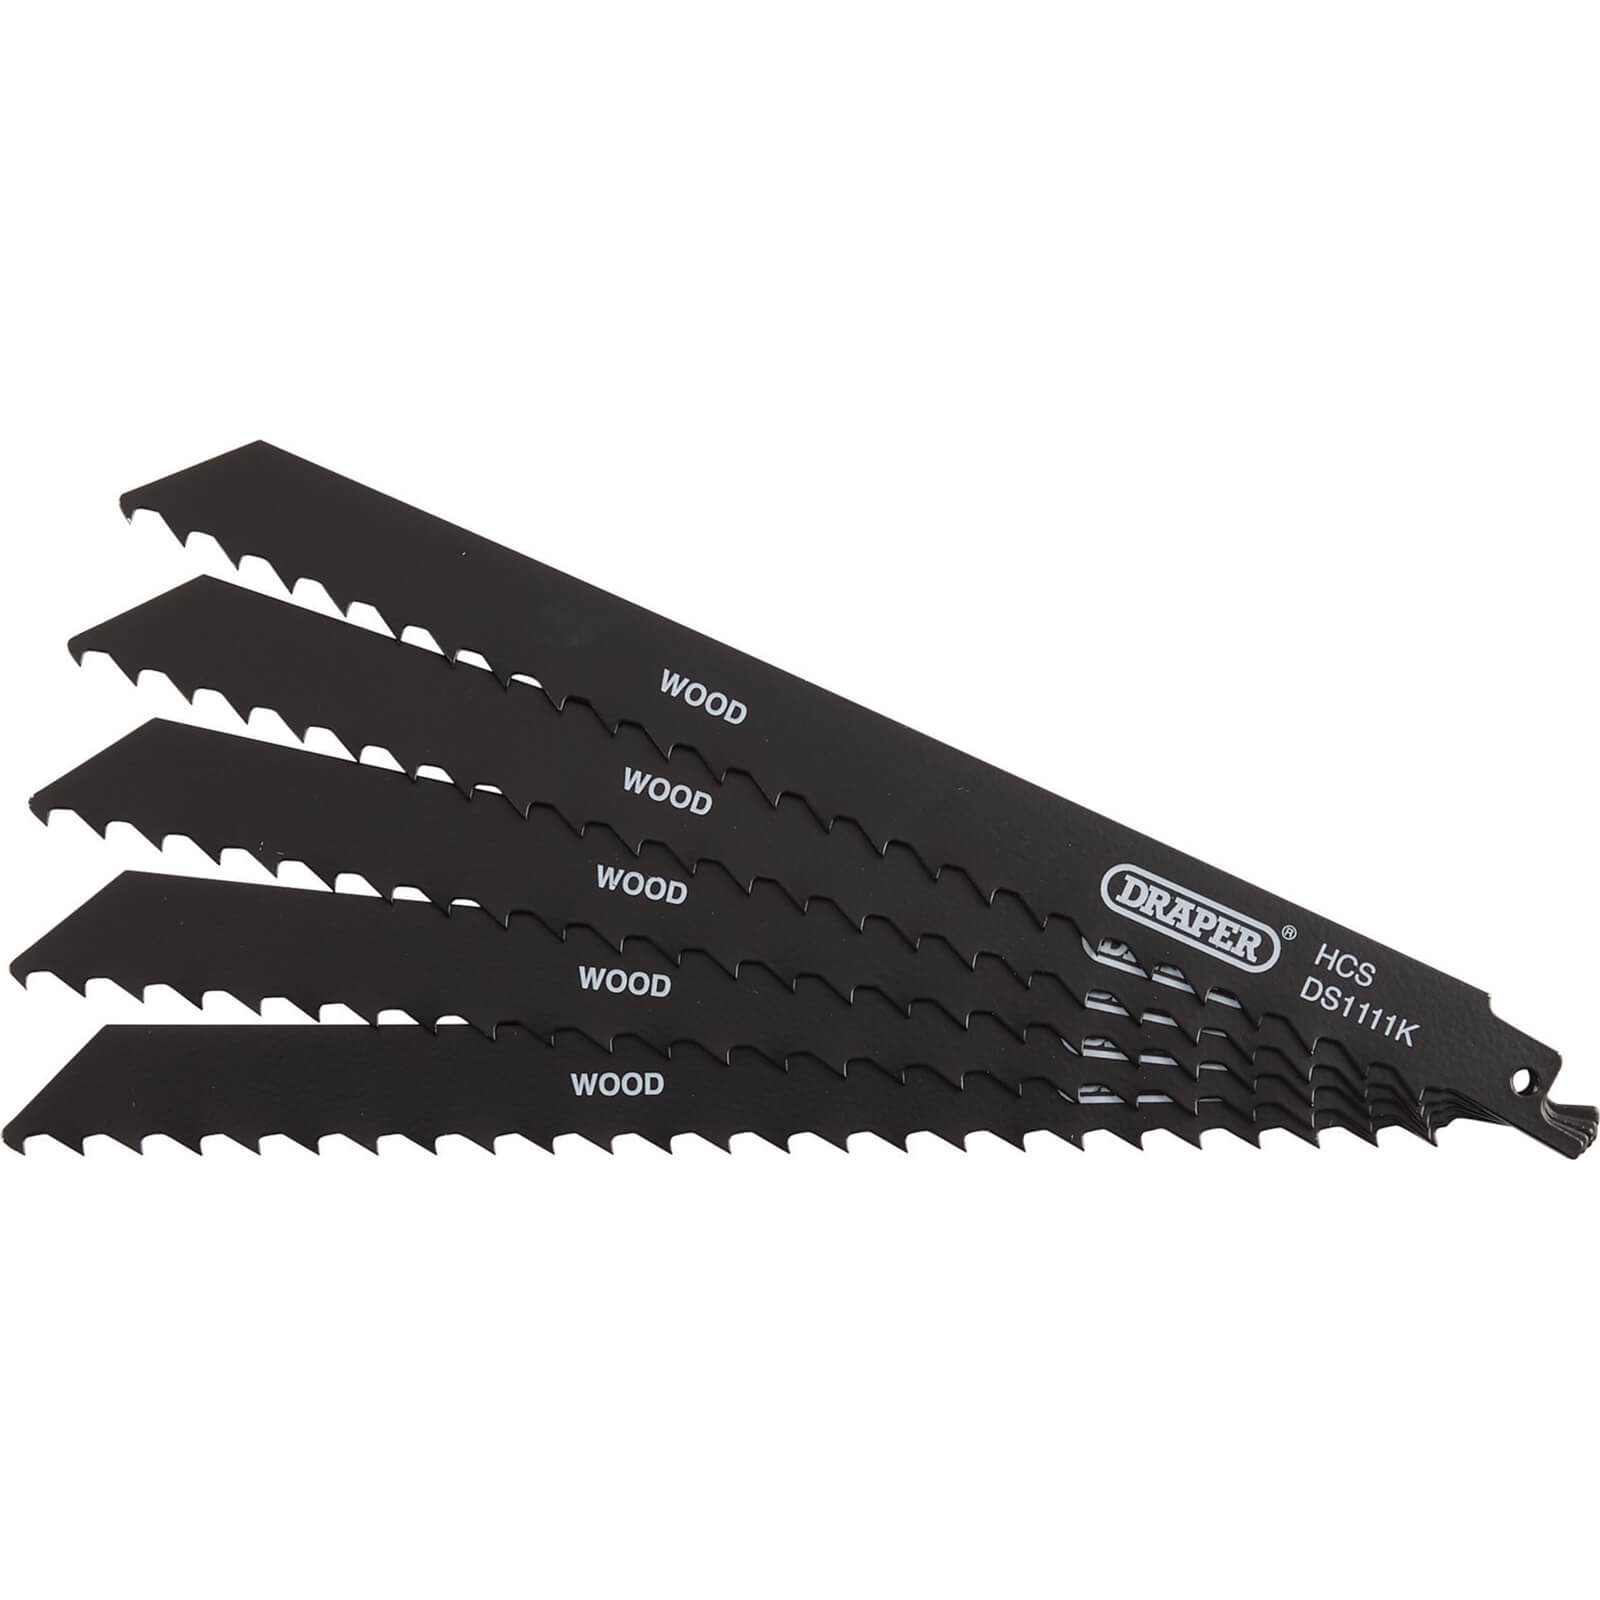 Image of Draper Wood and Plastic Cutting Reciprocating Sabre Saw Blades 225mm Pack of 5